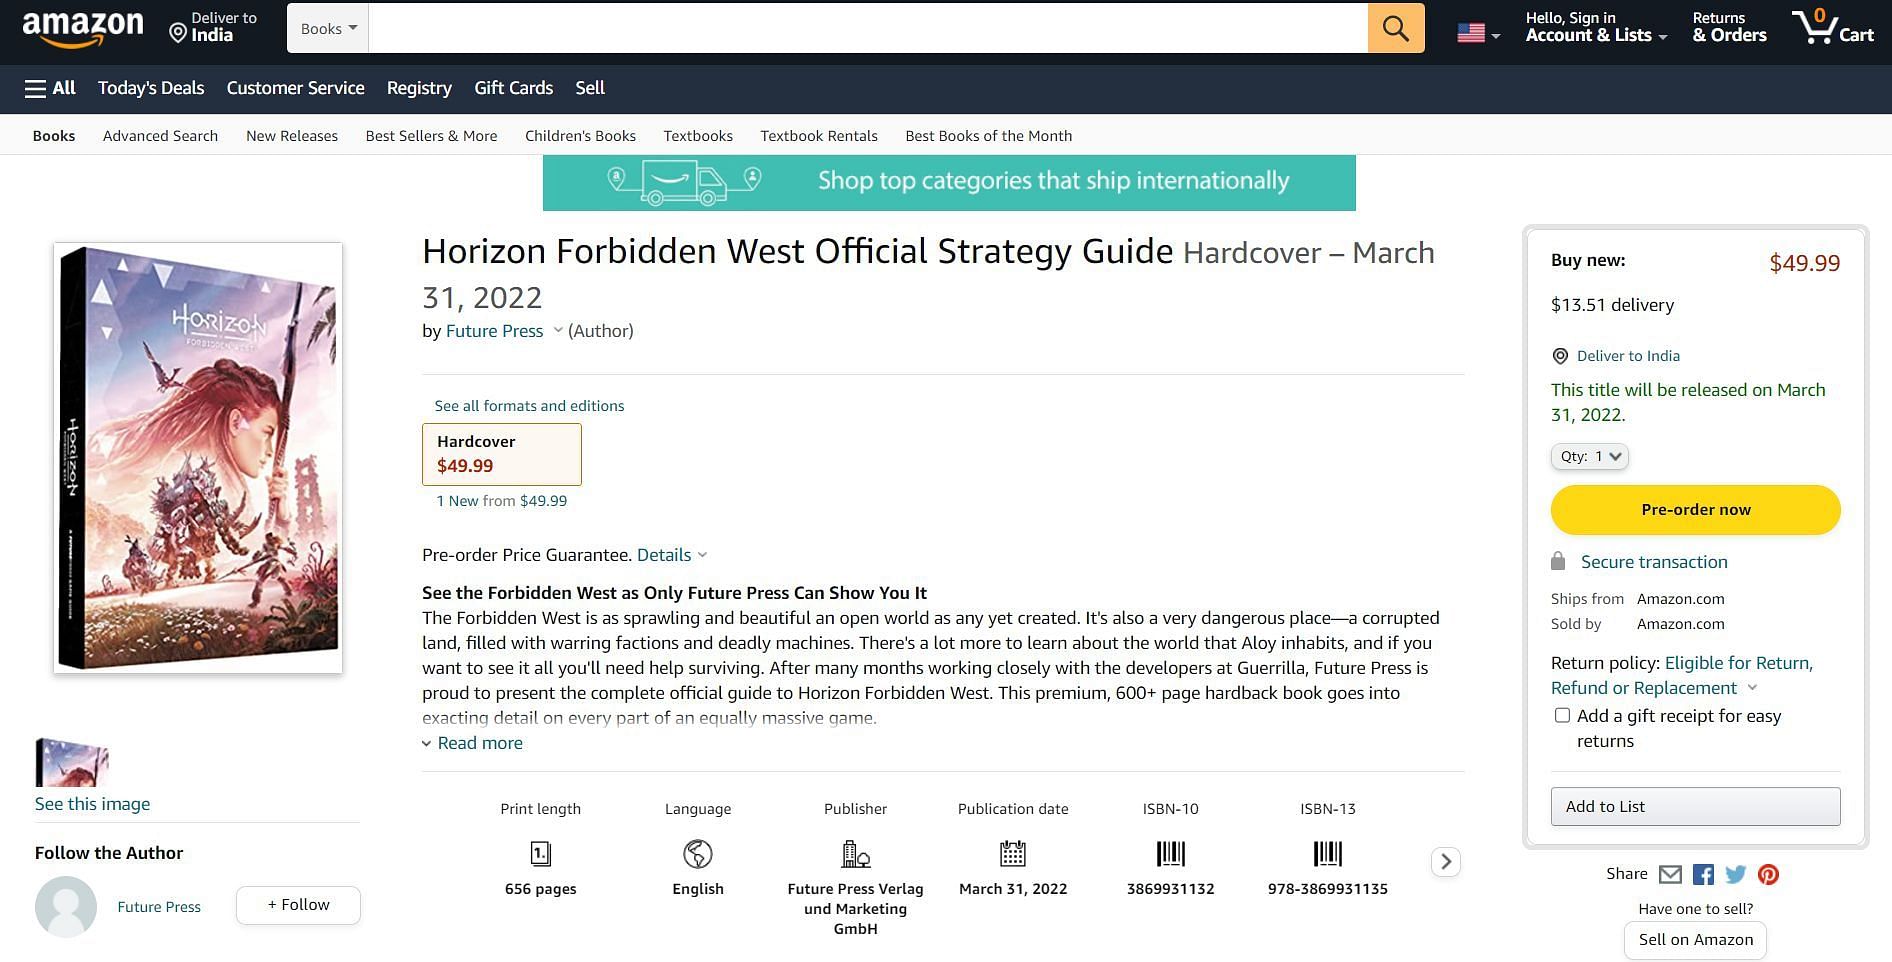 The Official Strategy Guide can be pre-ordered now (Image via Amazon)